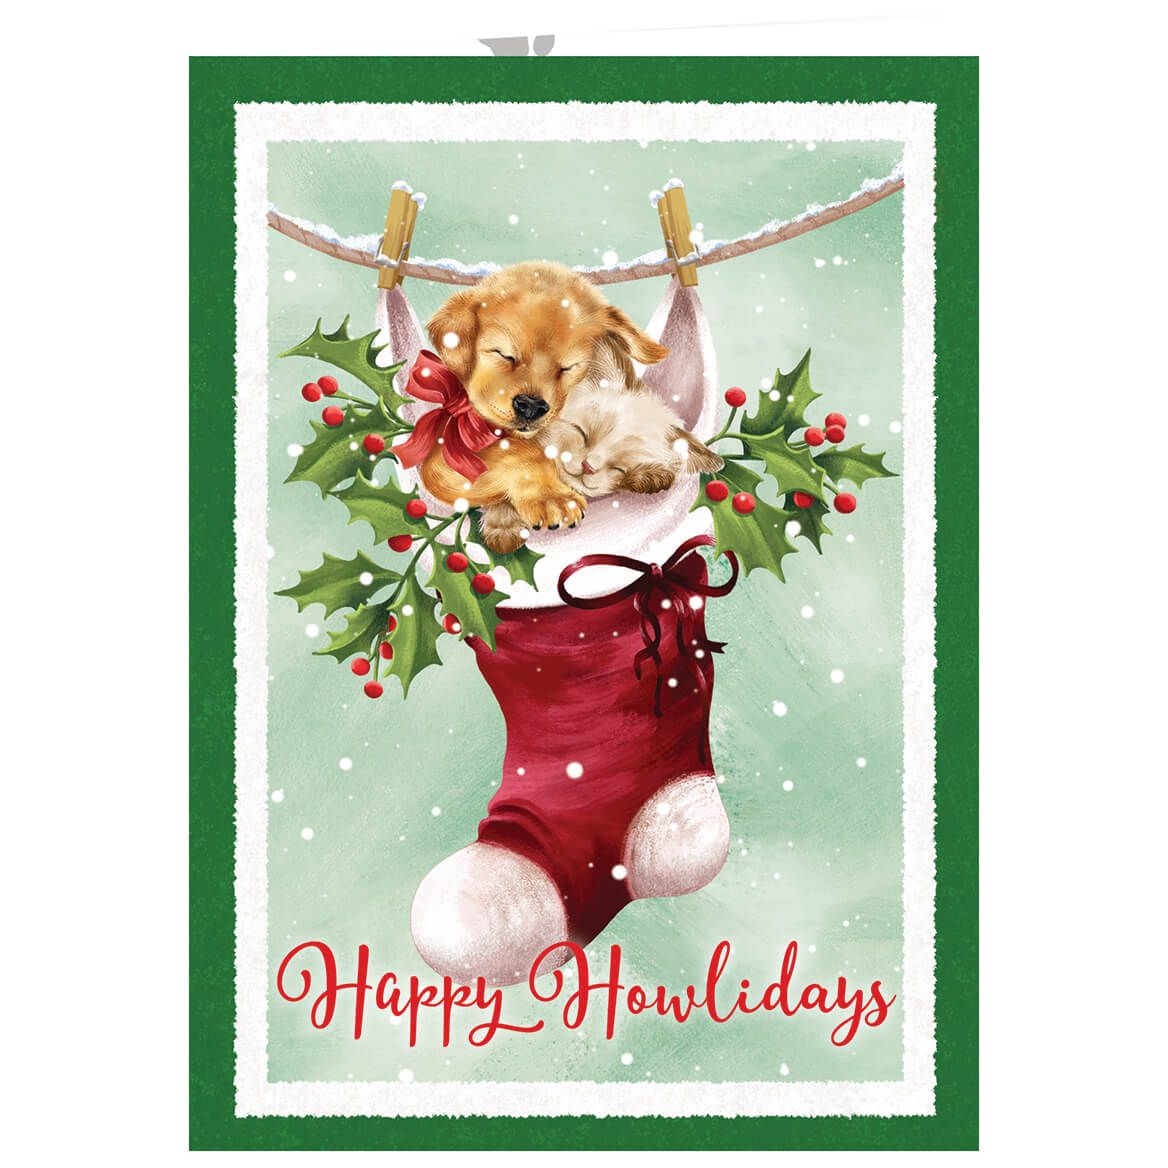 Cozy Greetings Christmas Cards set of 20 + '-' + 370186